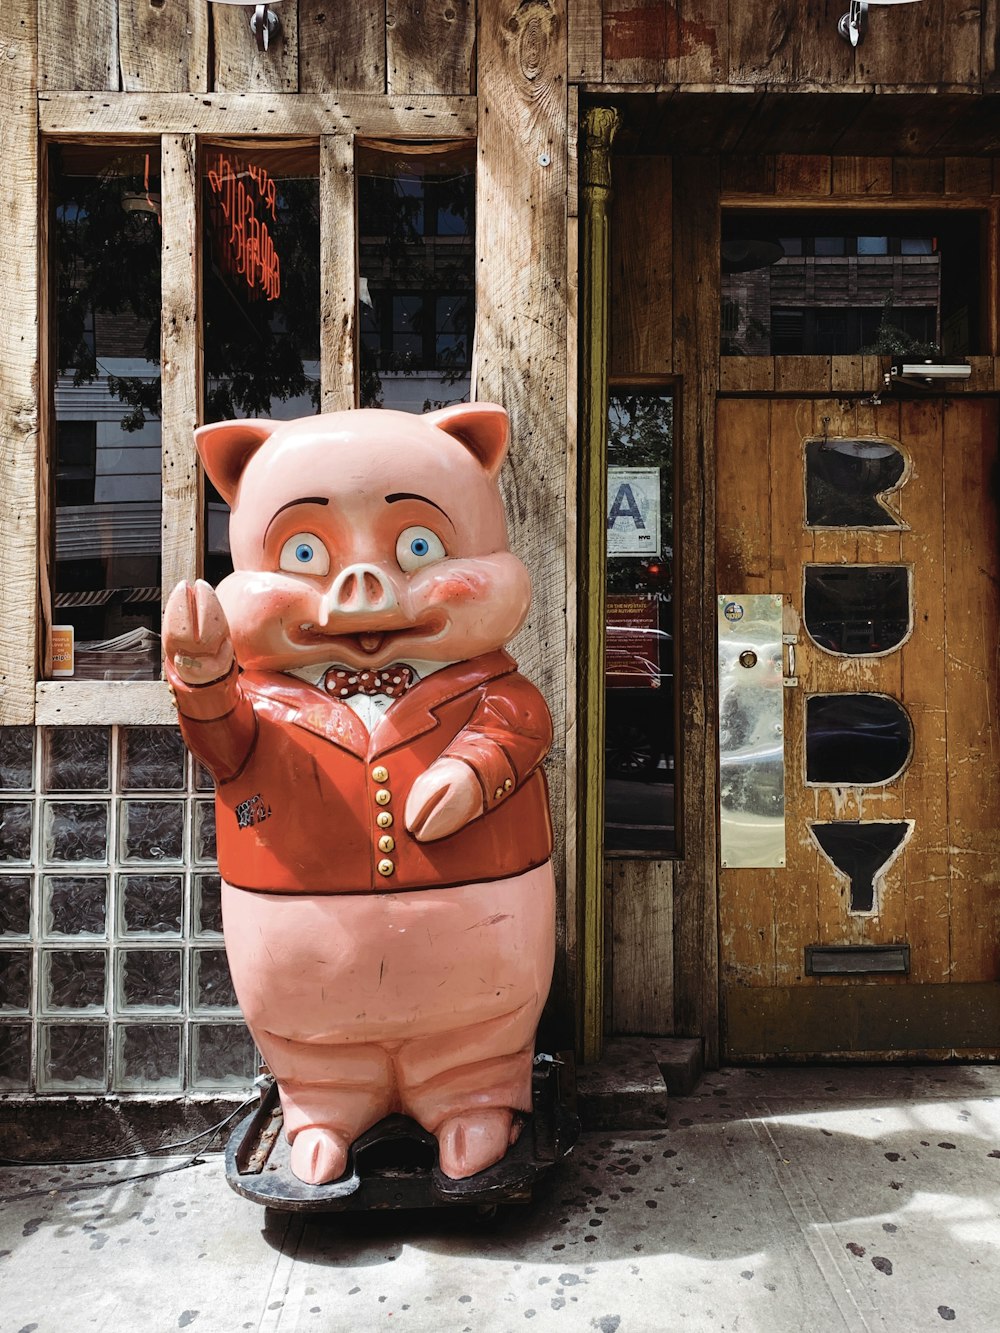 pink pig statue near brown wooden house